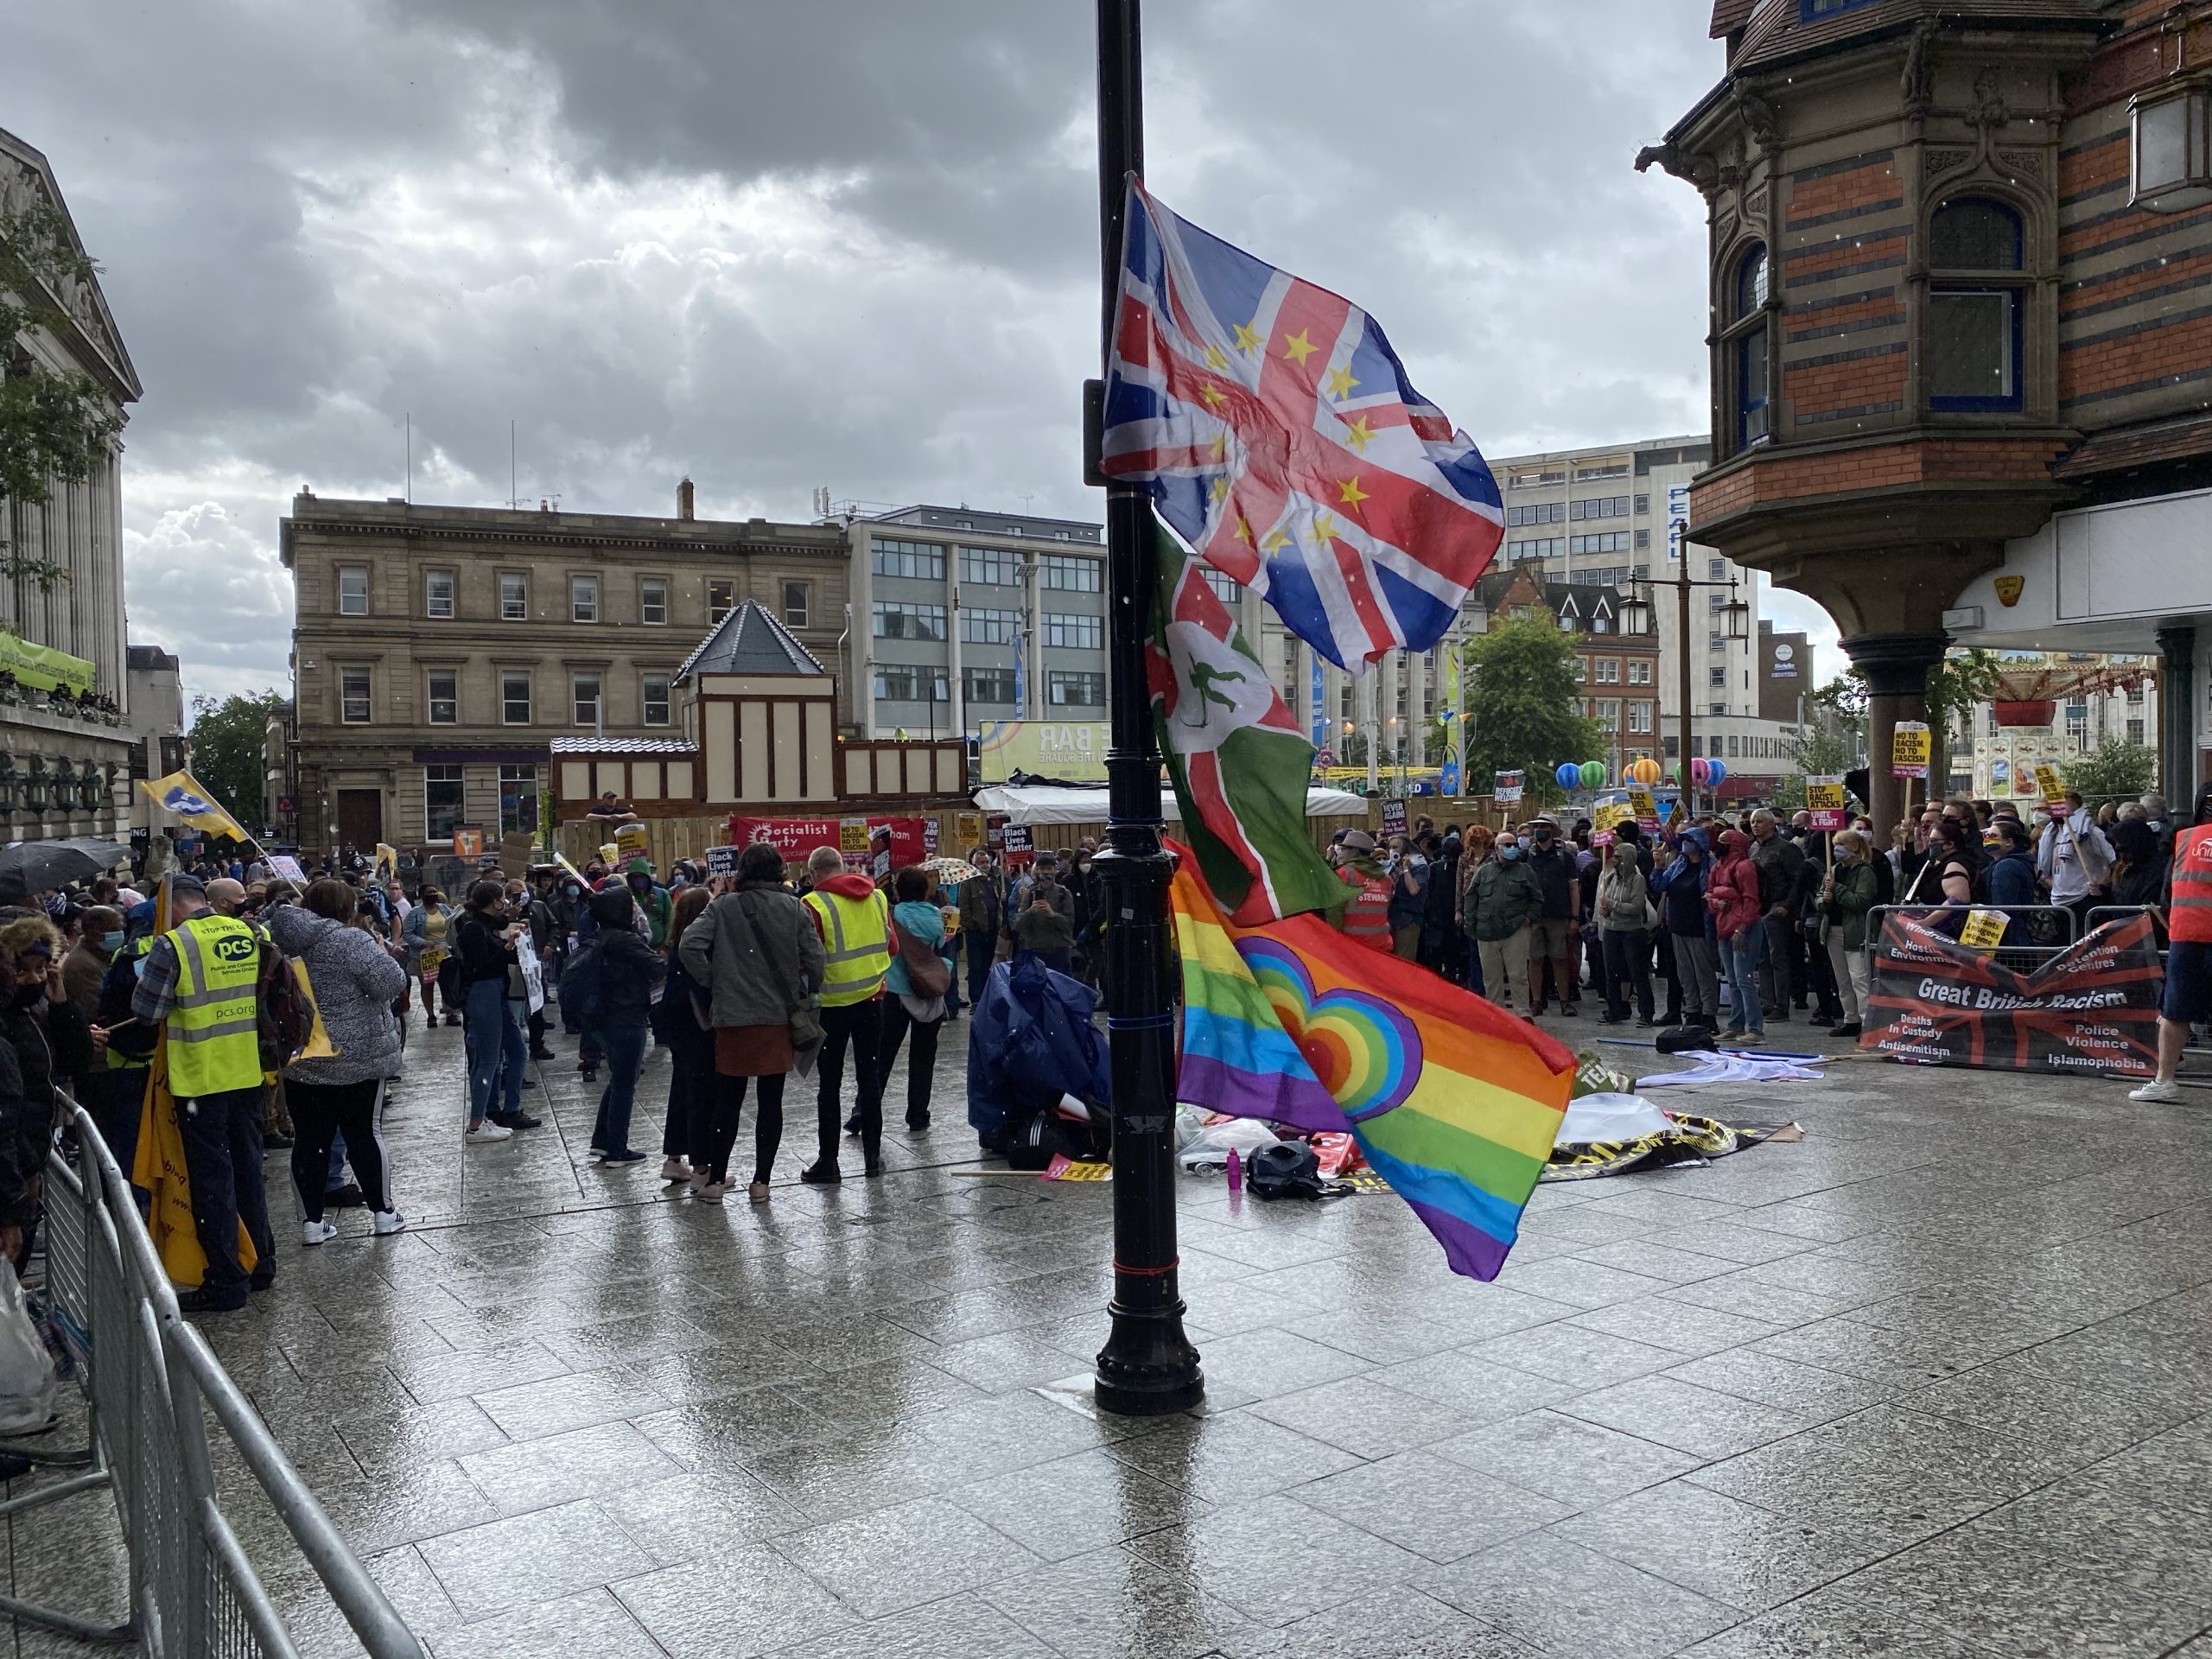 Nottingham city centre brought to a standstill by protests